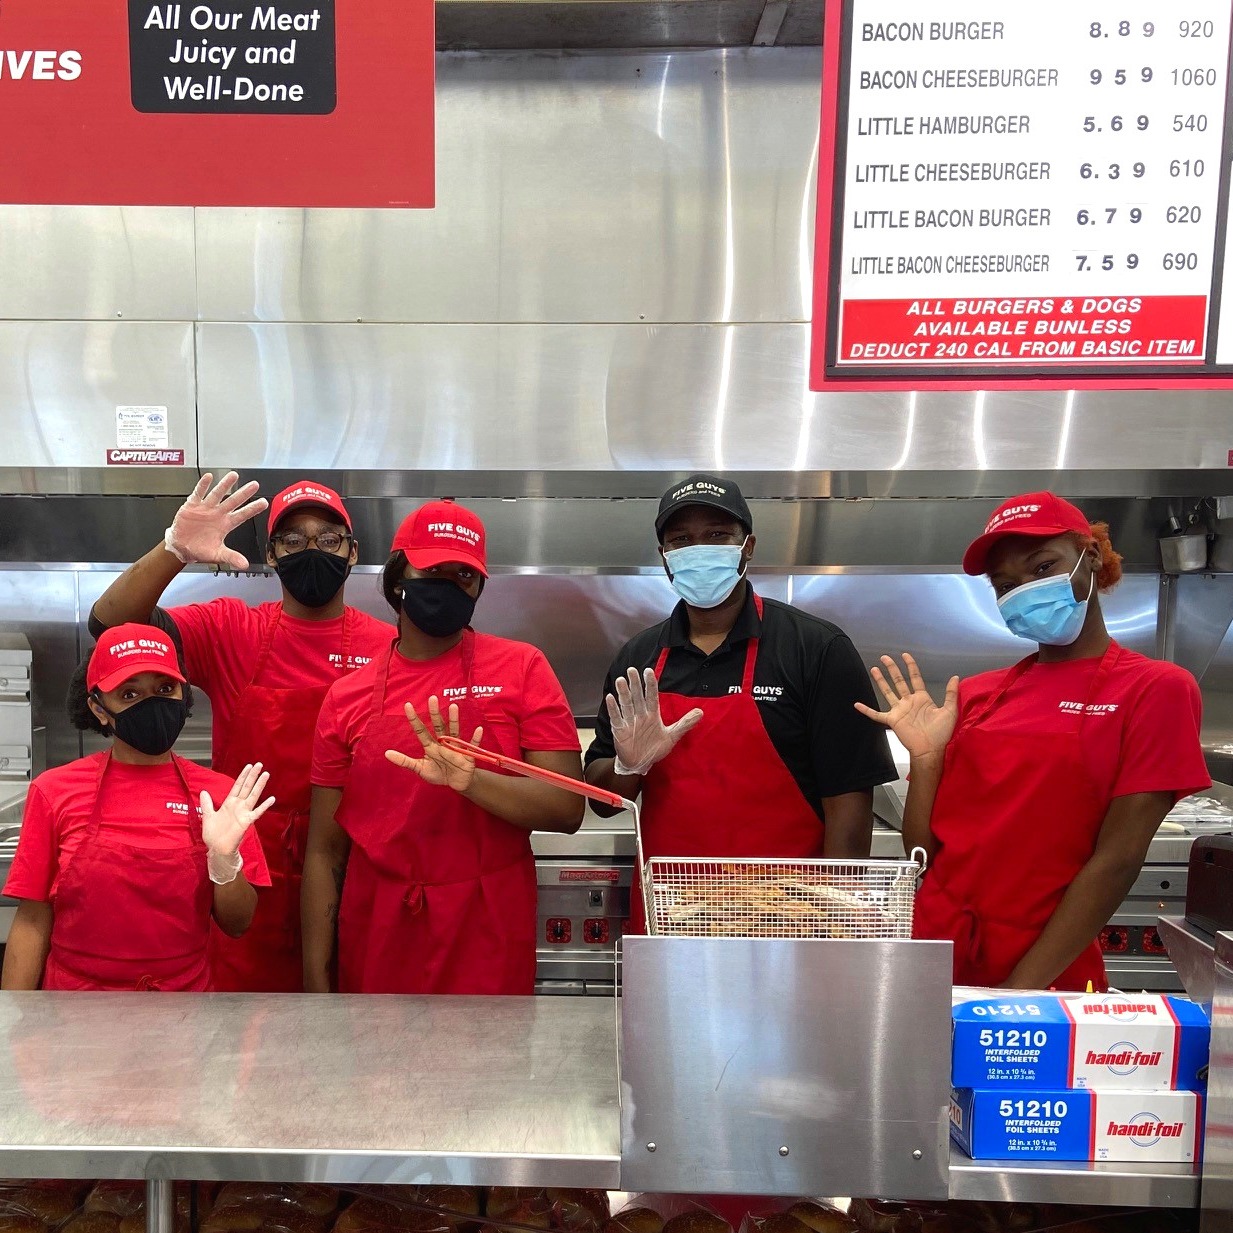 Five Guys at 600 Greenville Blvd. SE in Greenville, NC.